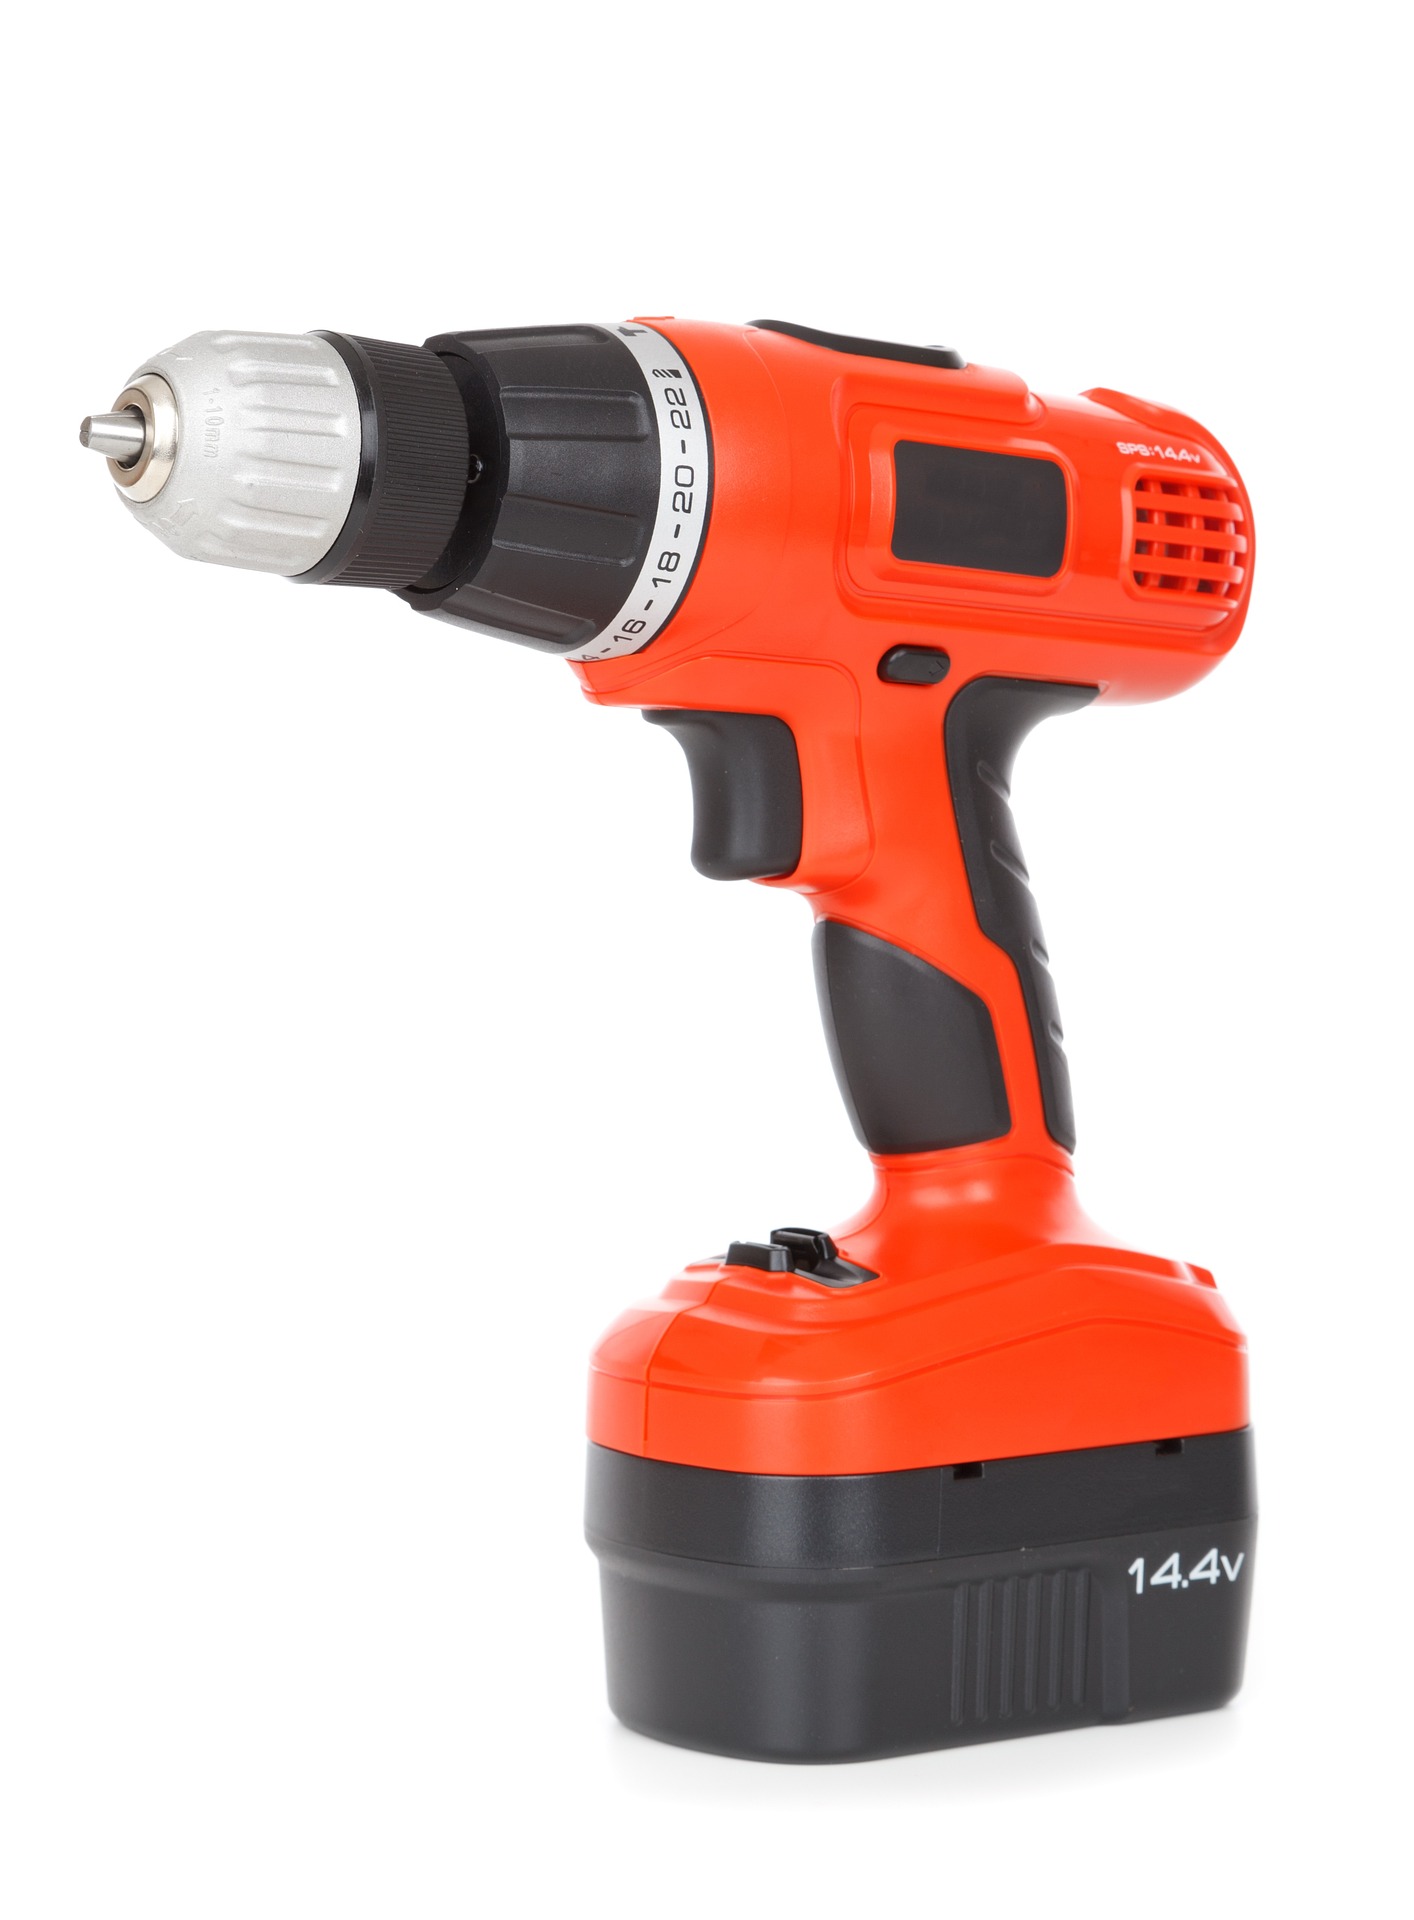 Cut out image of a battery operated electric drill